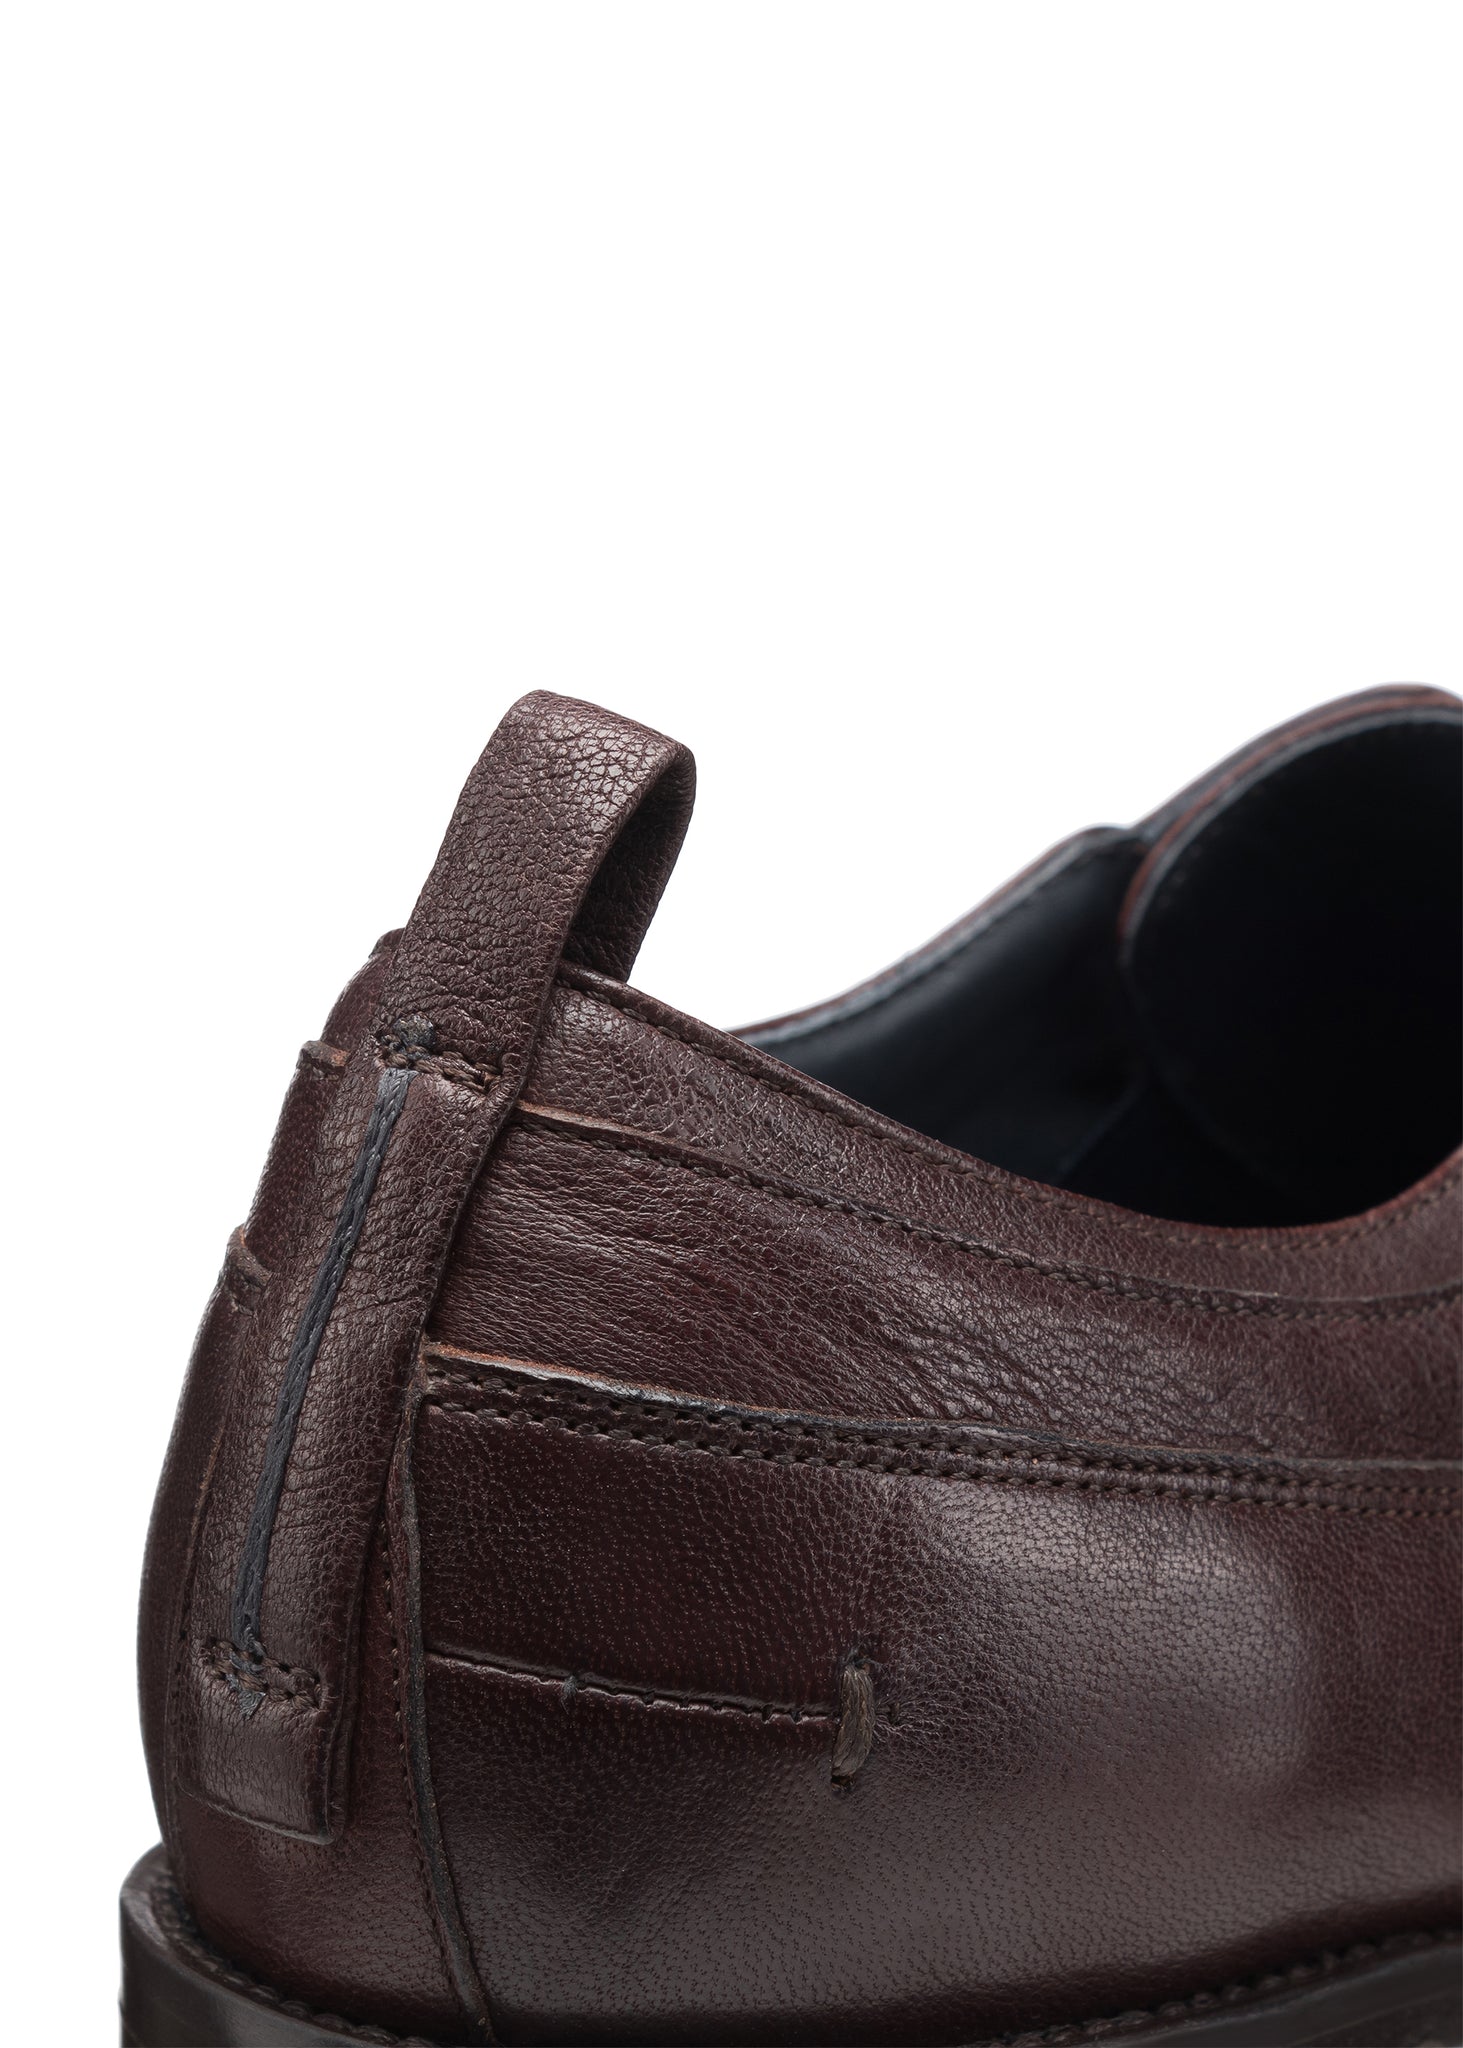 Detail View: Solleret Oxford